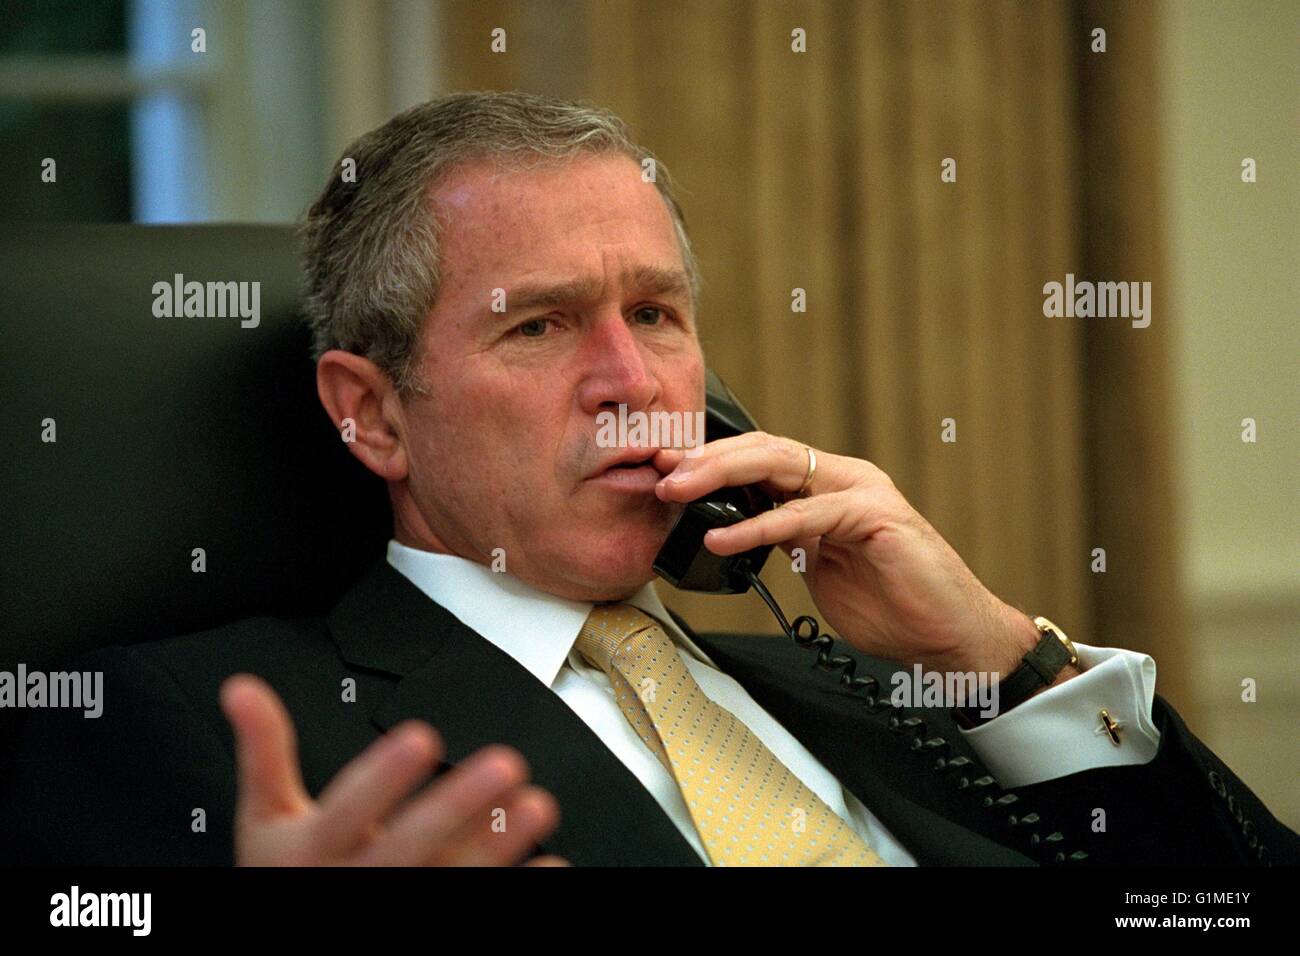 U.S President George W. Bush talks on the telephone with President Kim Dae-Jung of South Korea on the terror attacks of September 11th from the Oval Office of the White House September 19, 2001 in Washington, DC. Stock Photo